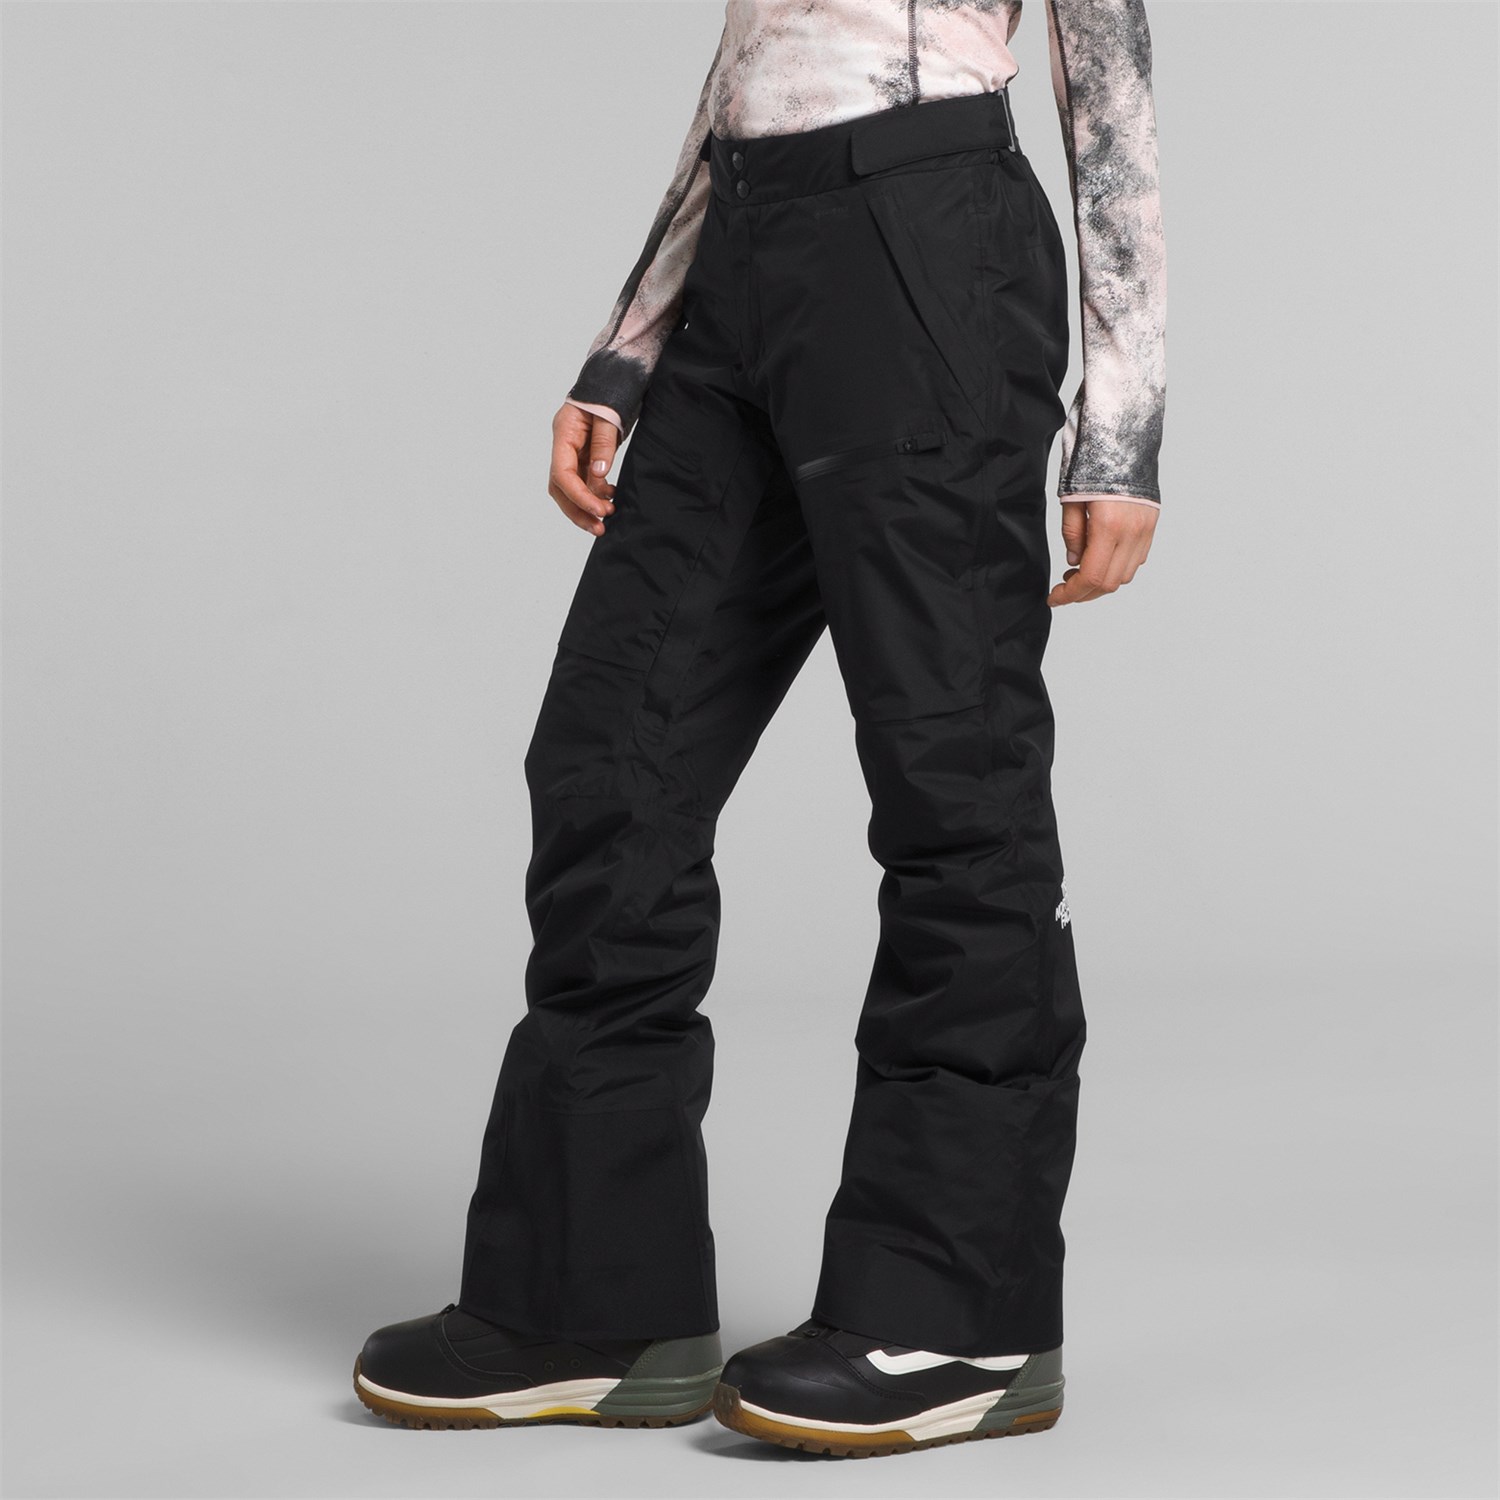 The North Face Anonym GORE-TEX Insulated Ski Pant (Women's